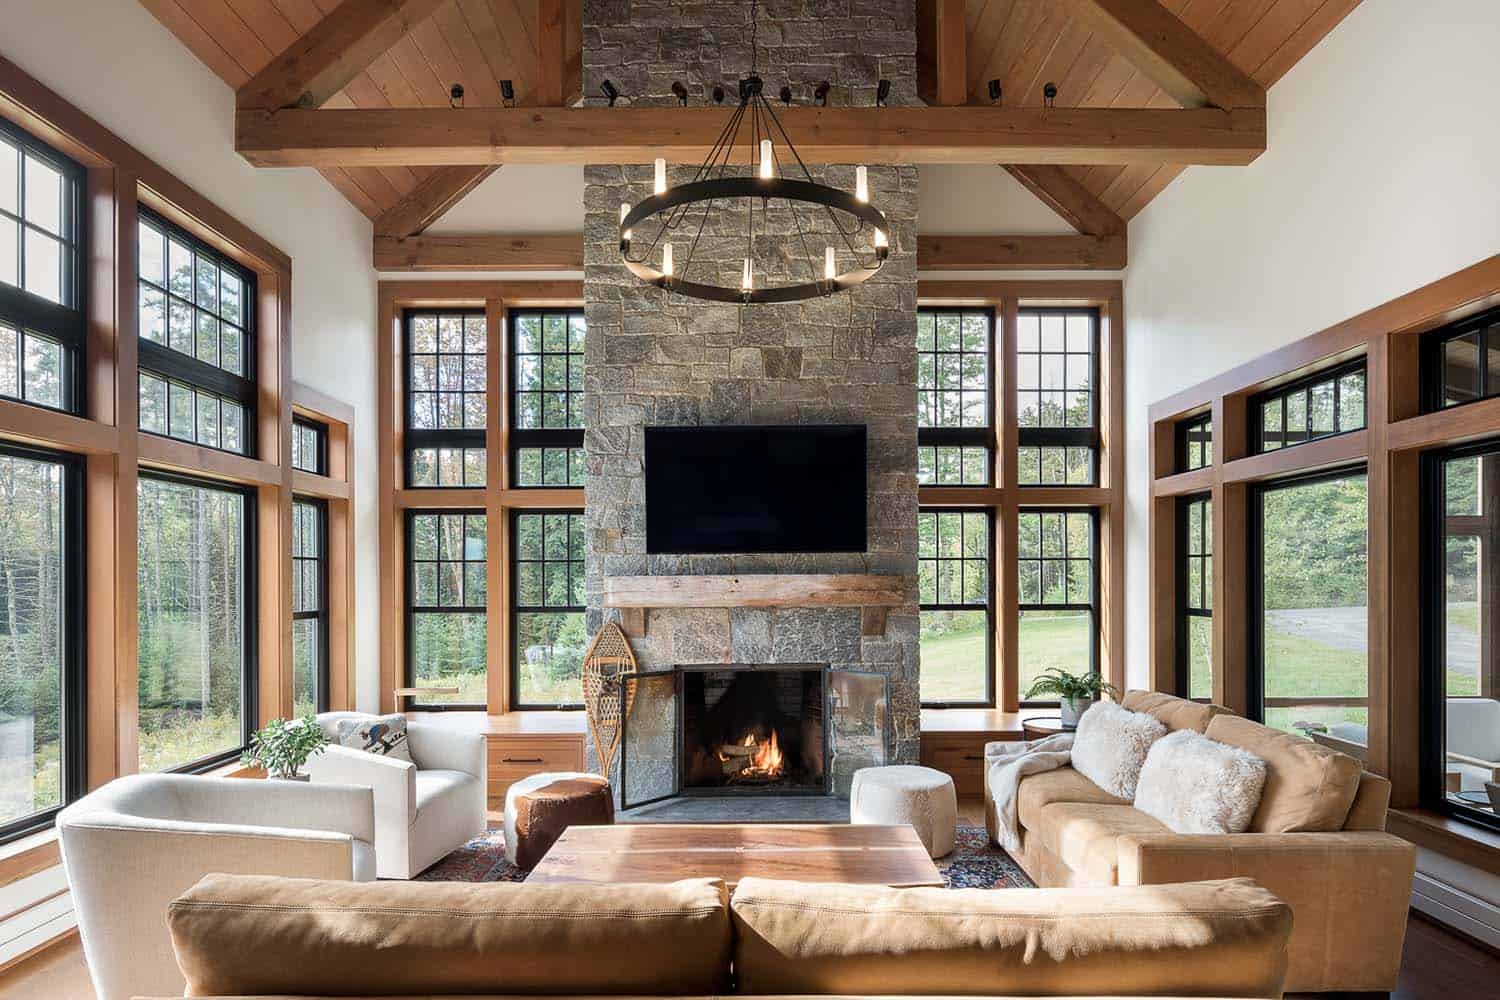 A Vermont ski house with a beautiful craftsman style aesthetic: Winterfell